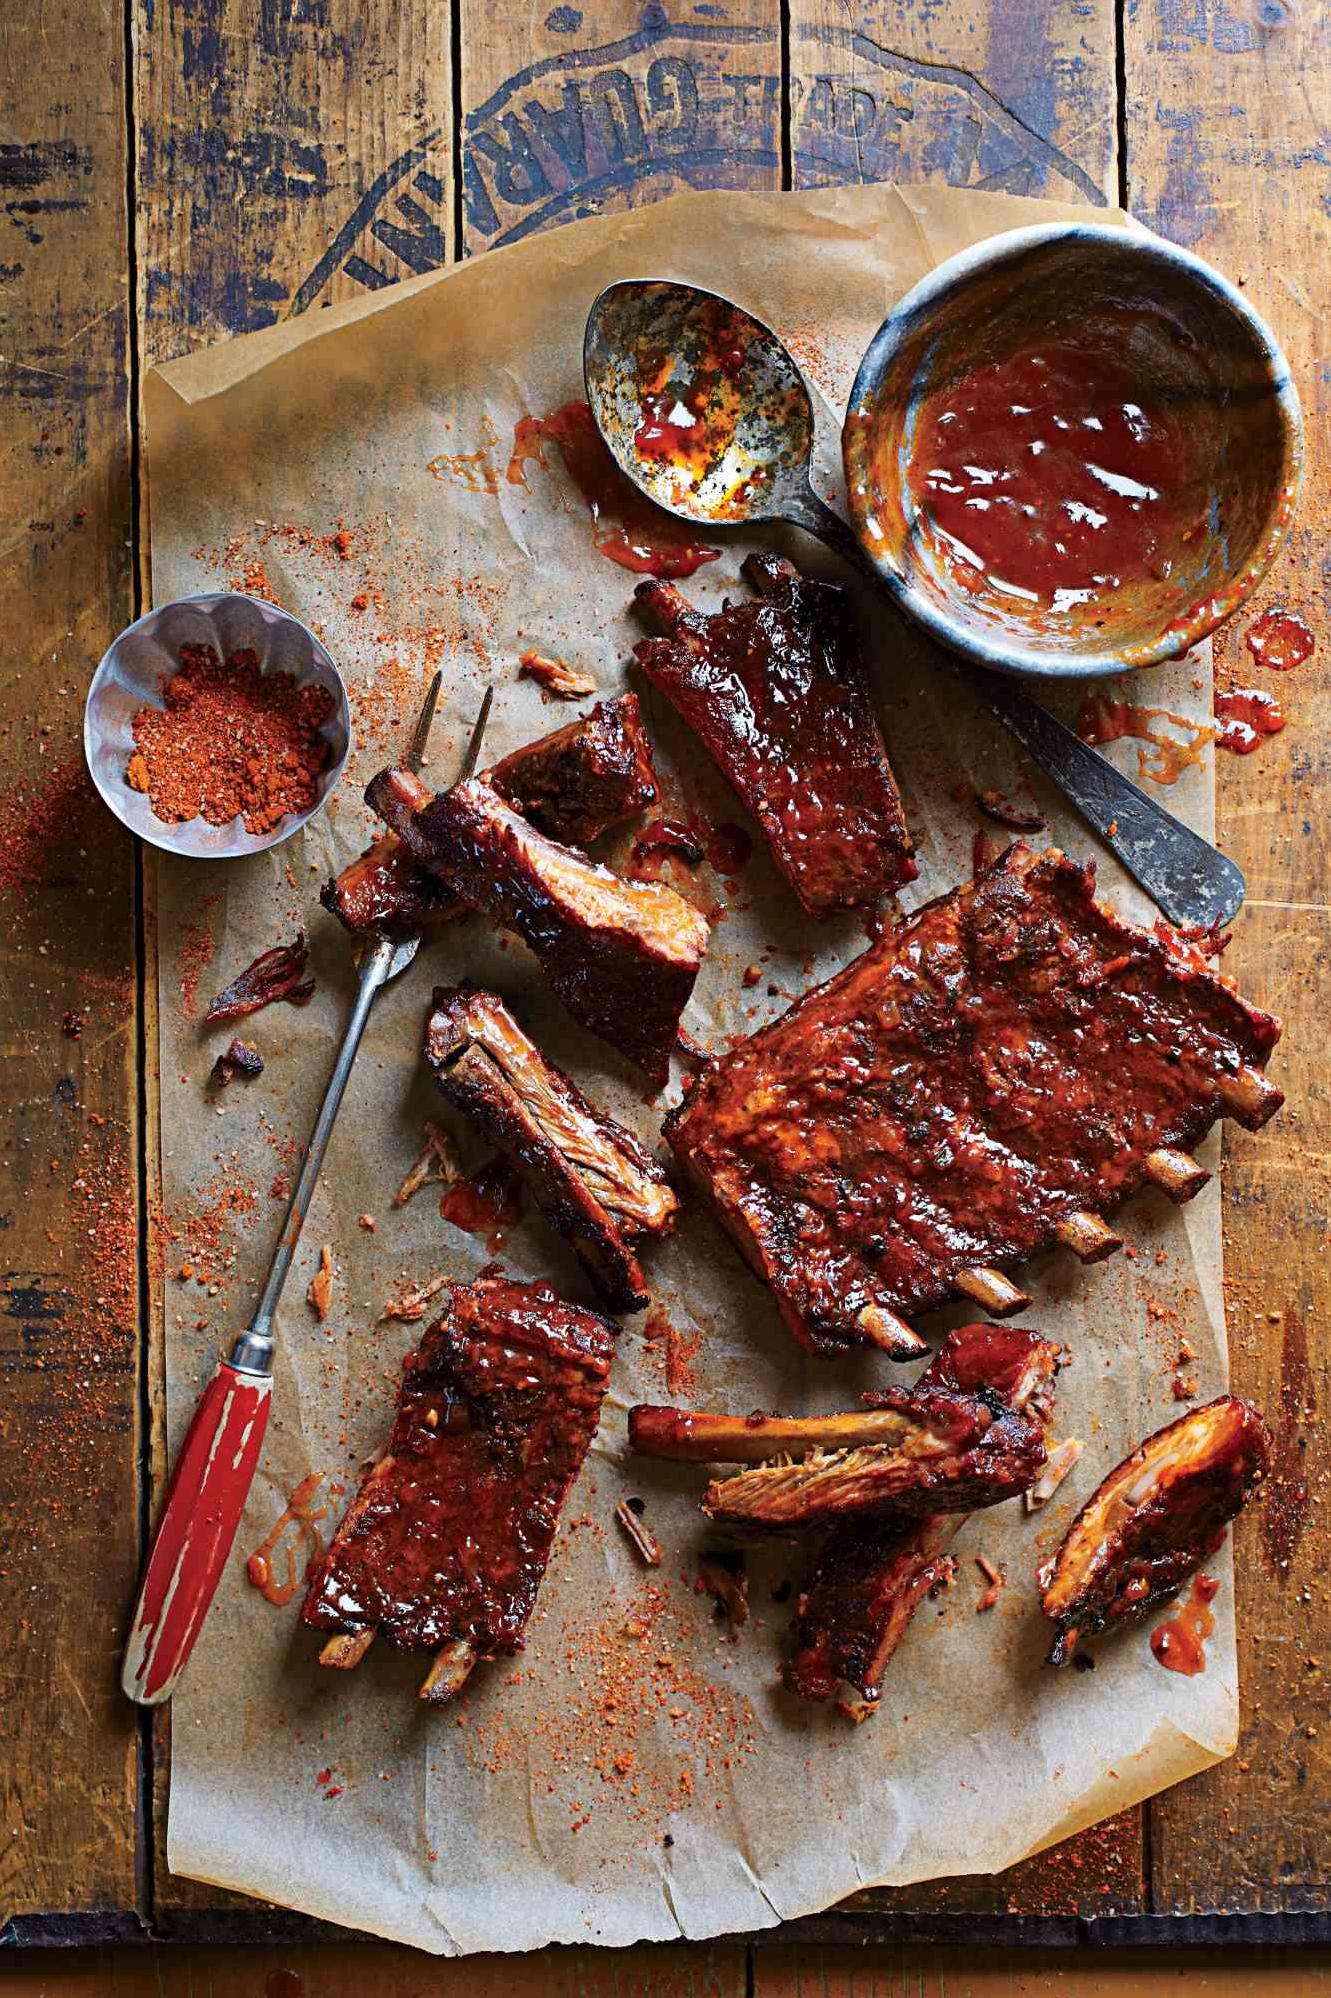  Bring the taste of the South to your backyard barbecues!